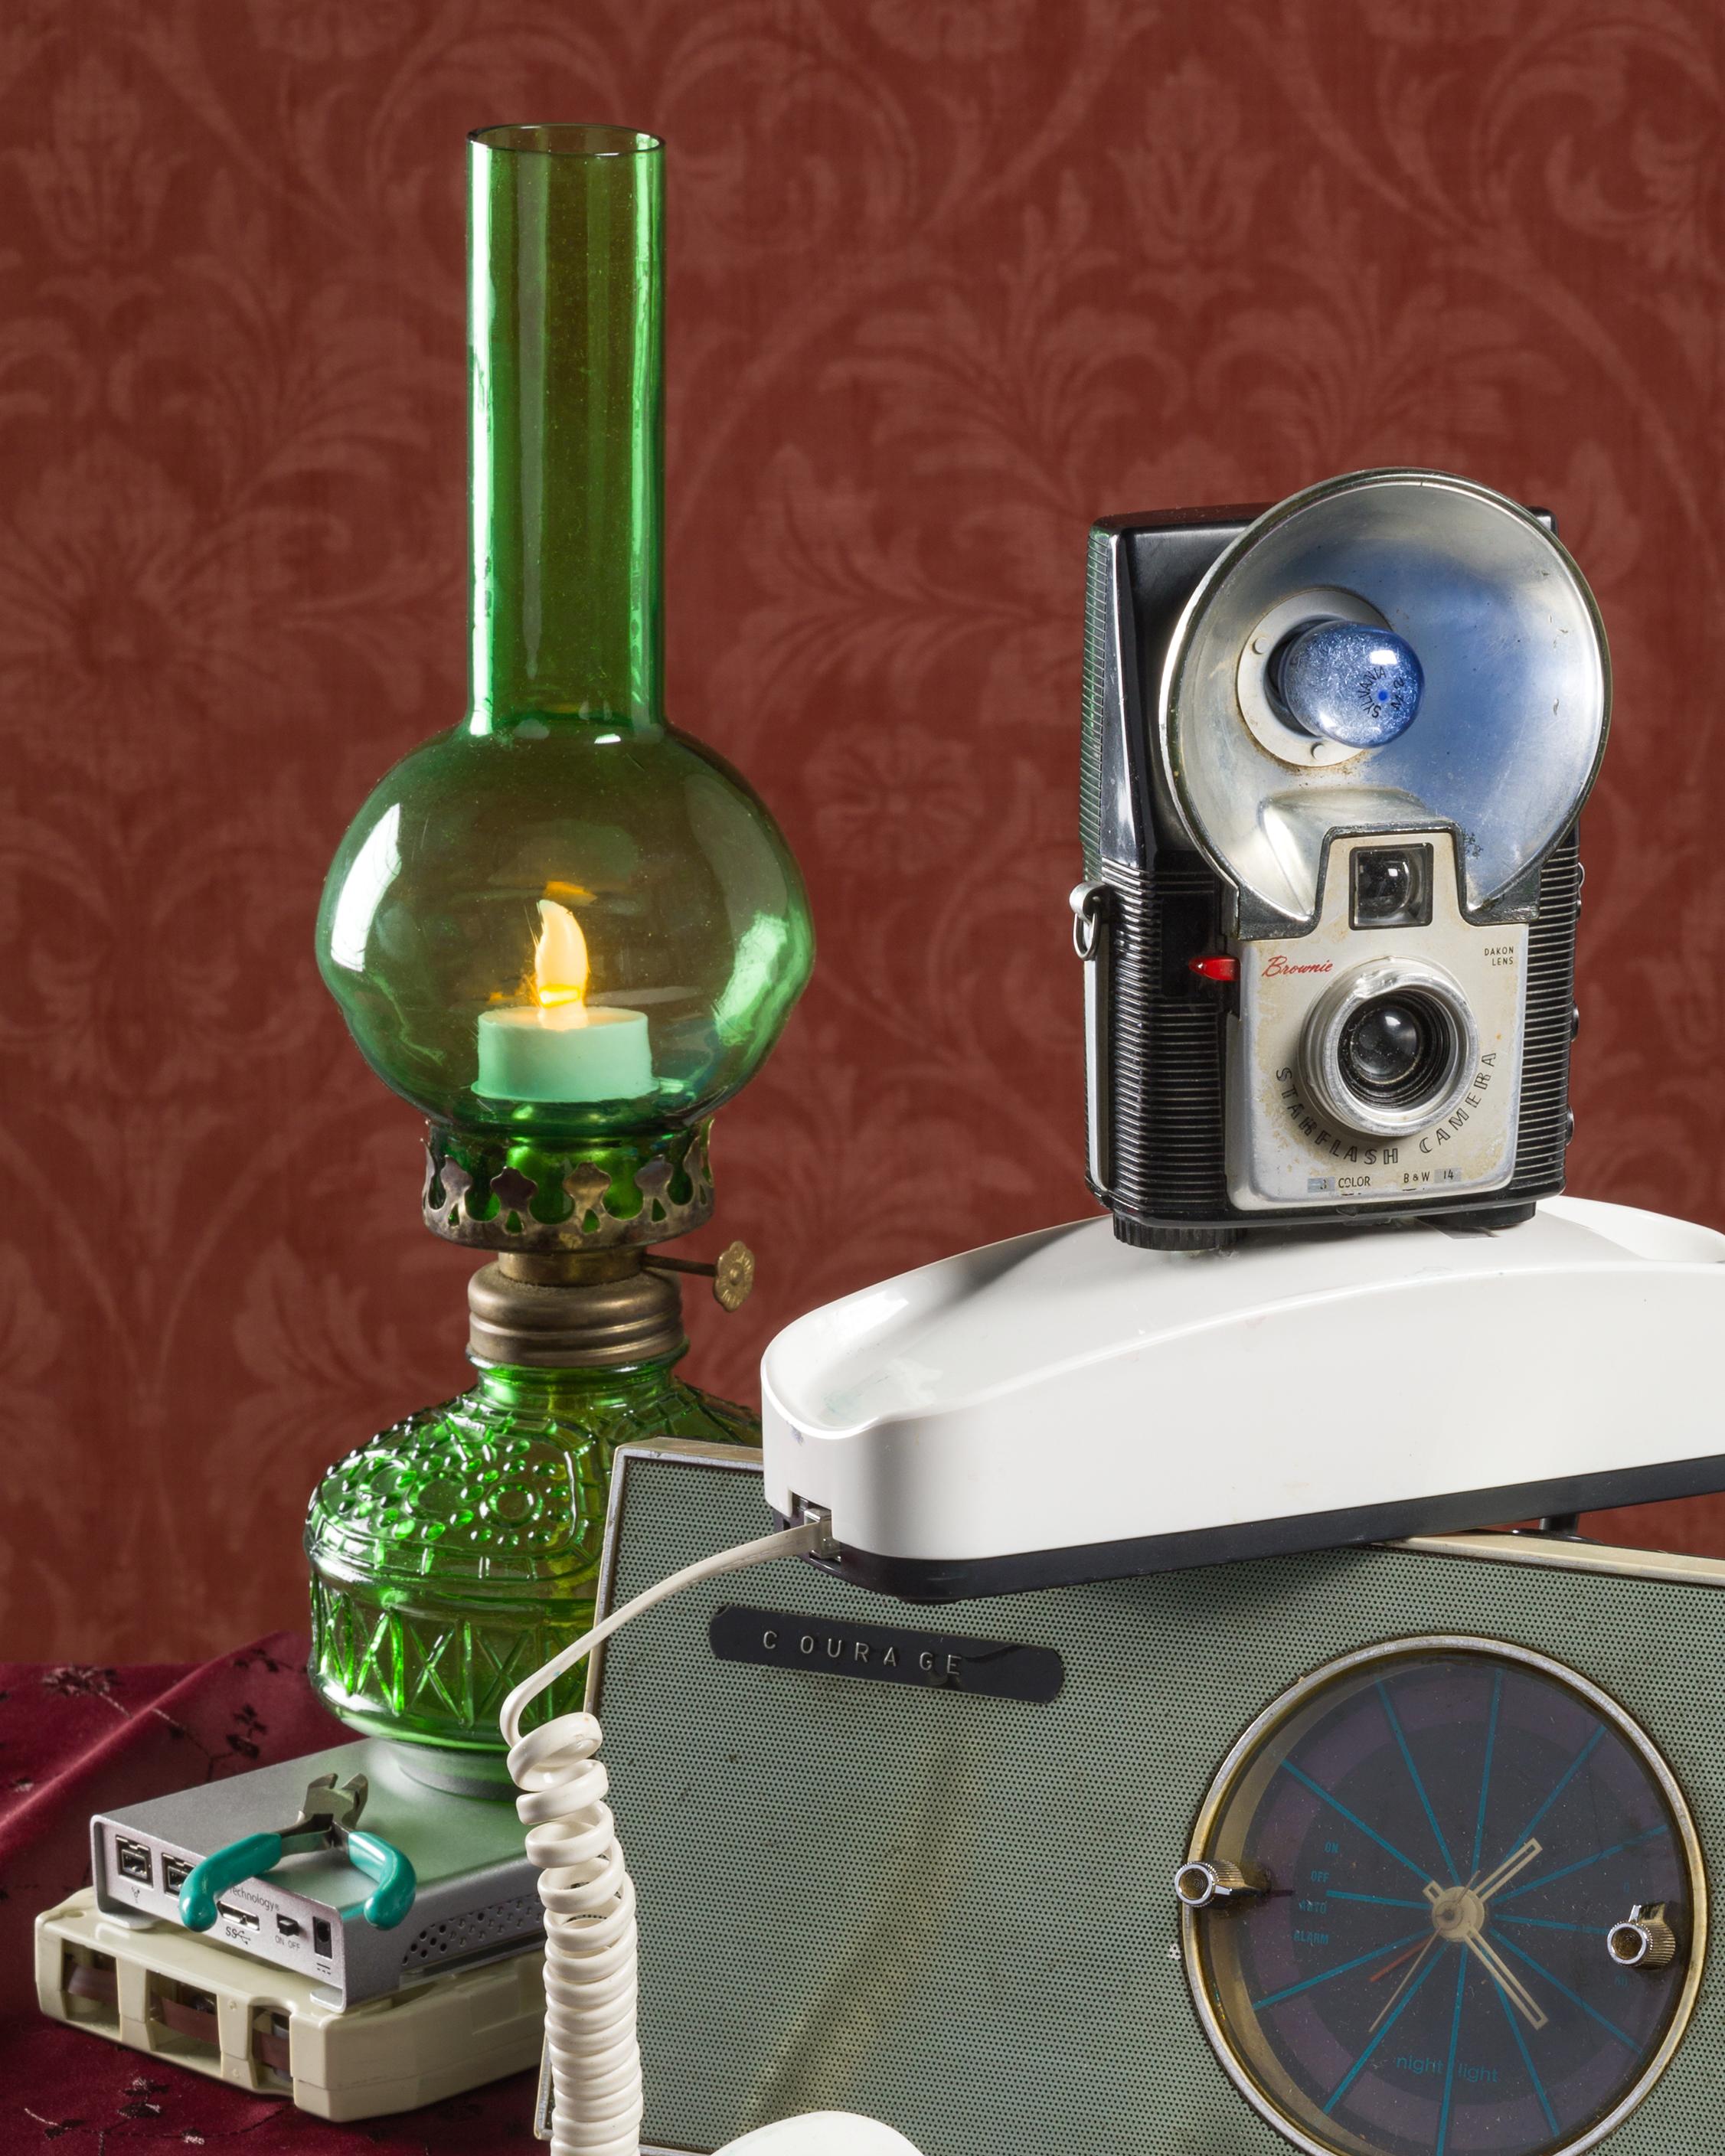 “Still Life with Spy Camera” continues my exploration of vintage tech begun in my 